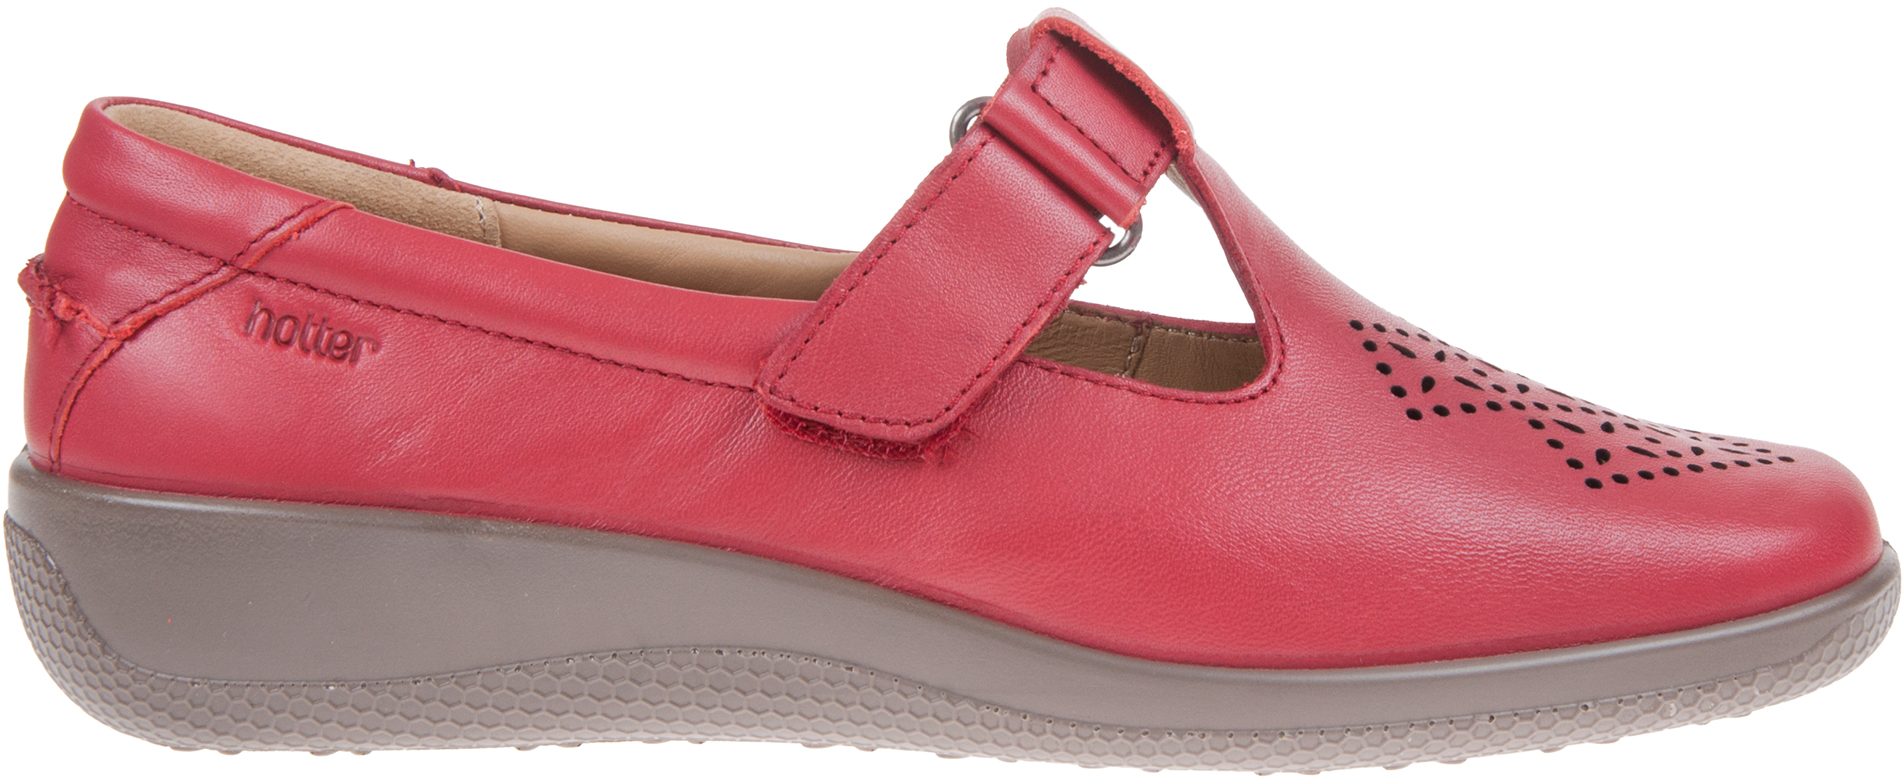 Hotter Sunset Tango Red - Everyday Shoes - Humphries Shoes